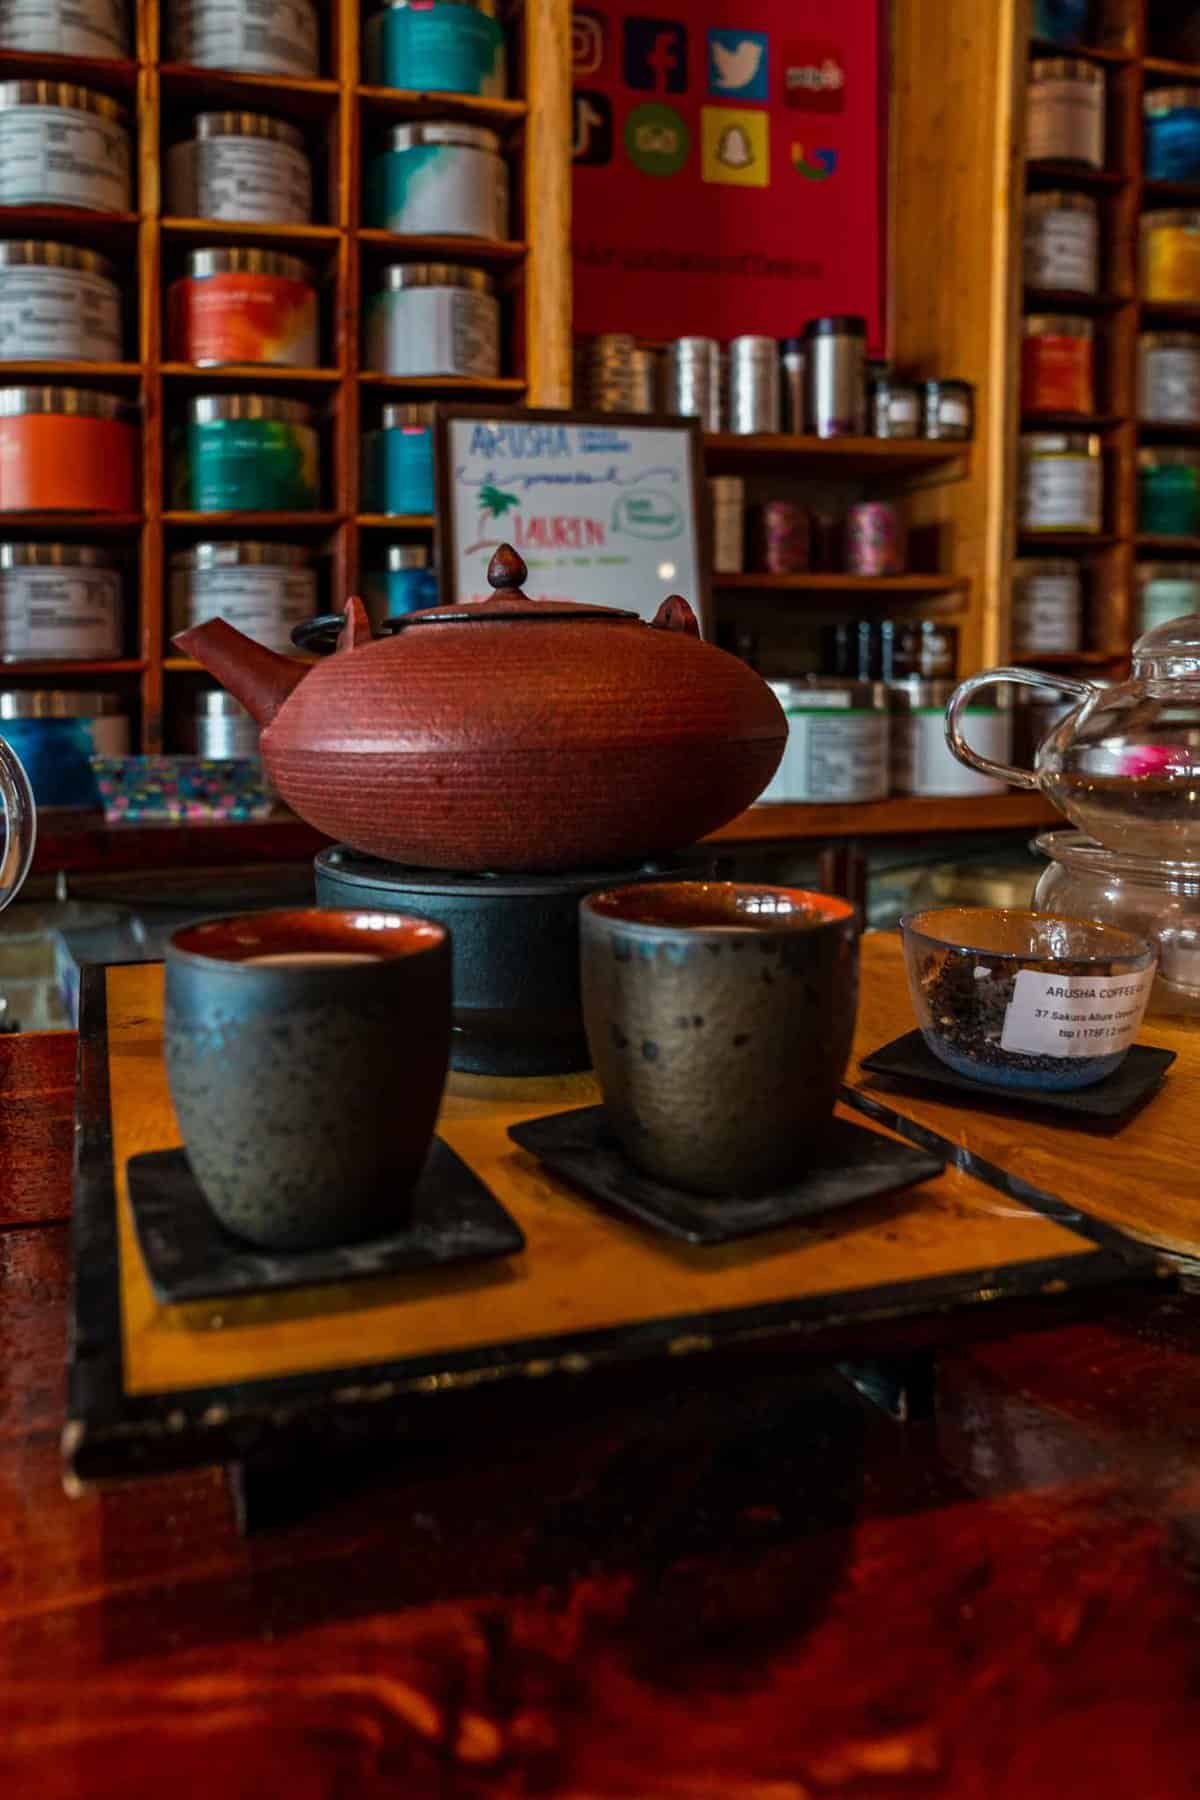 Tea set sold at Arusha Coffee Shop in Belton TX Things to do